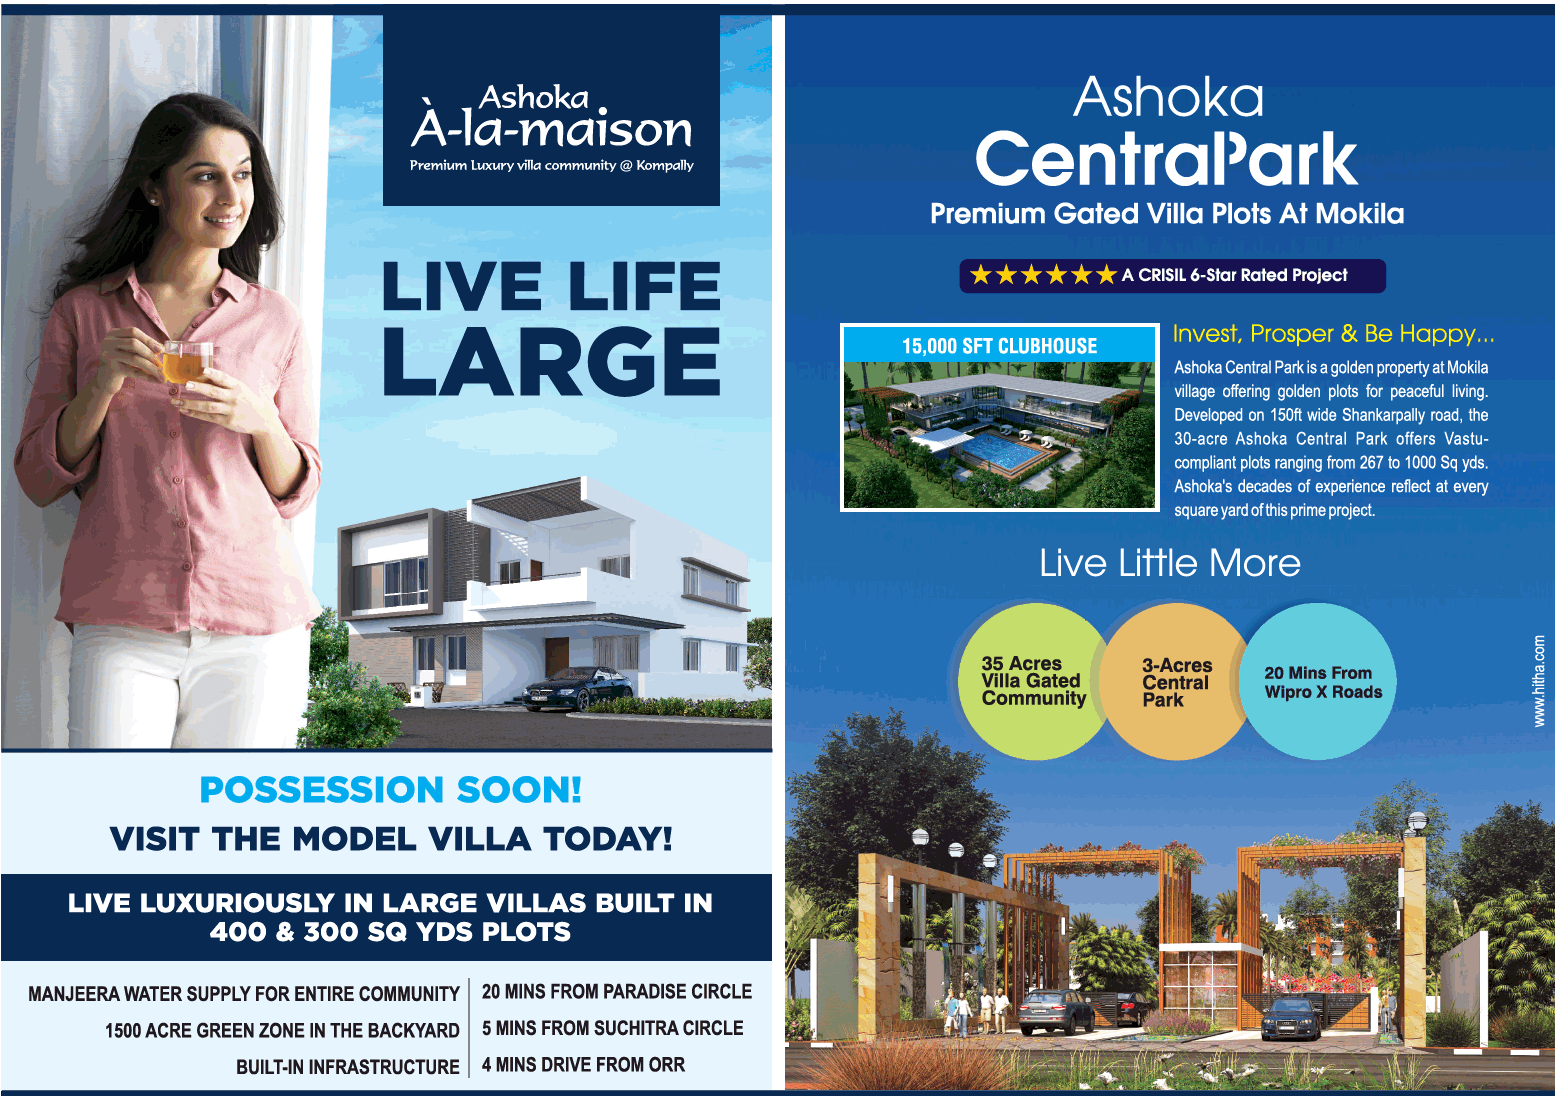 Live Life Large at Ashoka Projects in Hyderabad Update